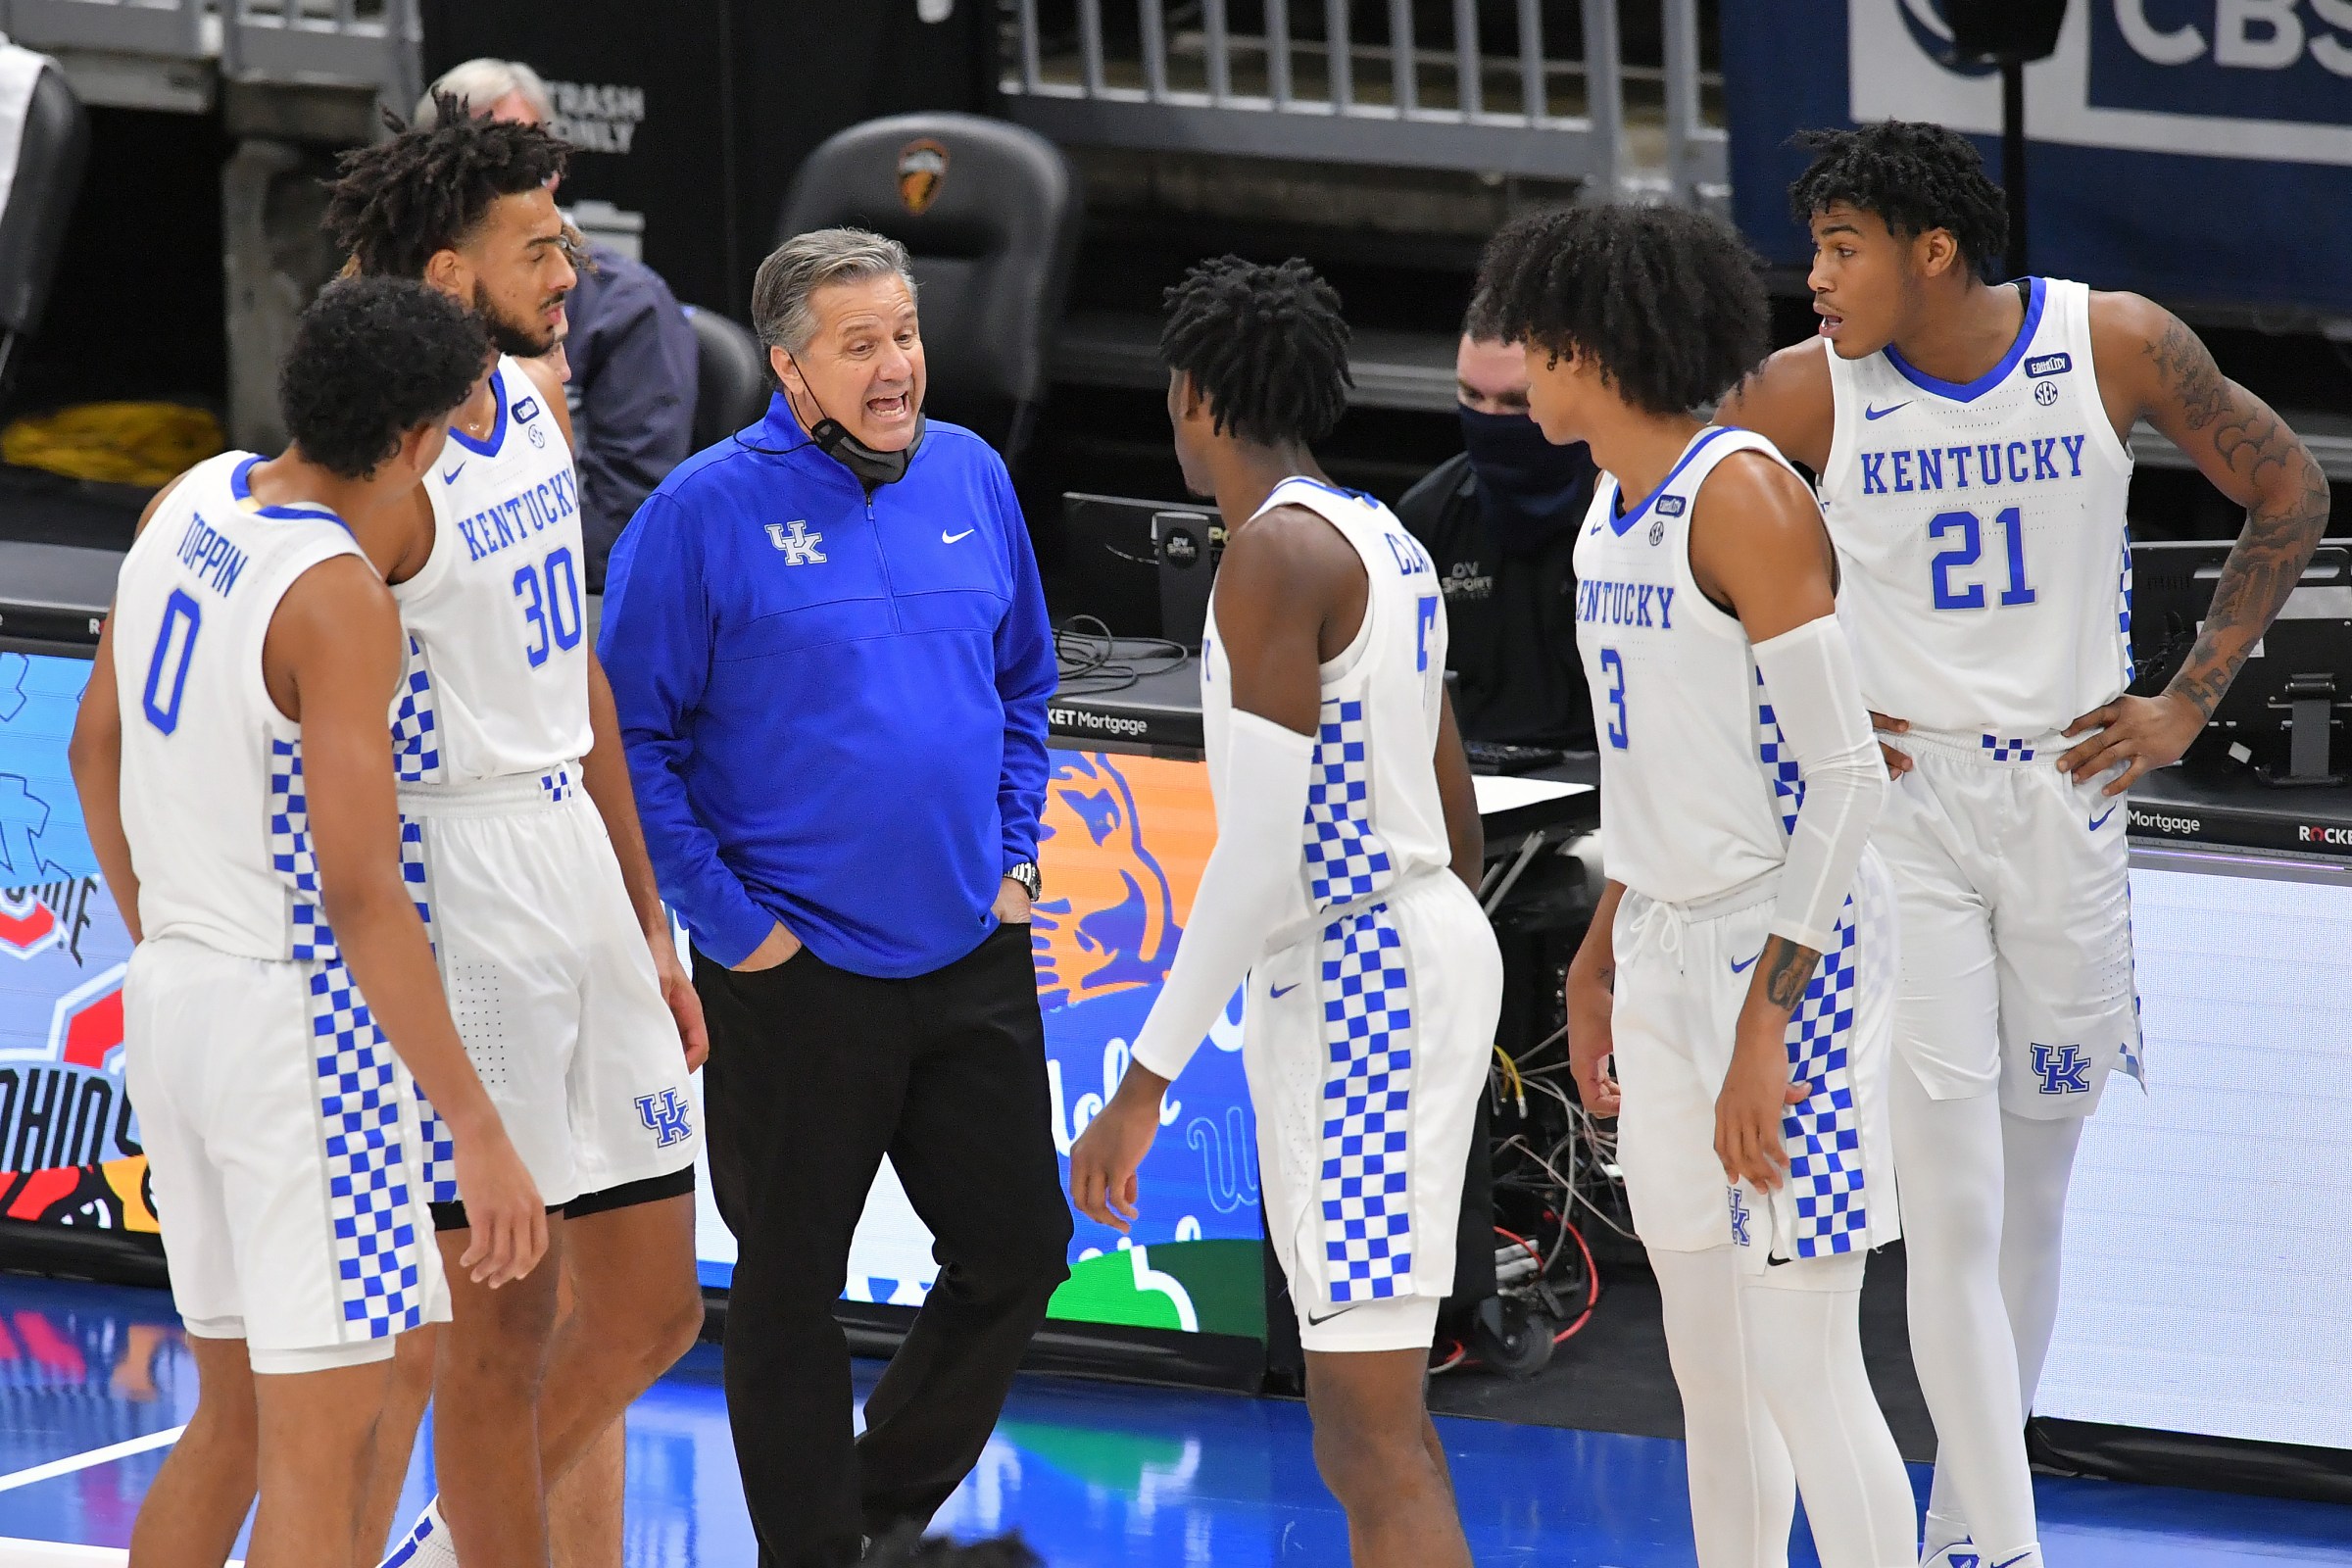 Head coach John Calipari of the Kentucky Wildcats talks to his players during a time-out during the second half against the North Carolina Tar Heels at Rocket Mortgage Fieldhouse on December 19, 2020 in Cleveland, Ohio. The Tar Heels defeated the Wildcats 75-63.